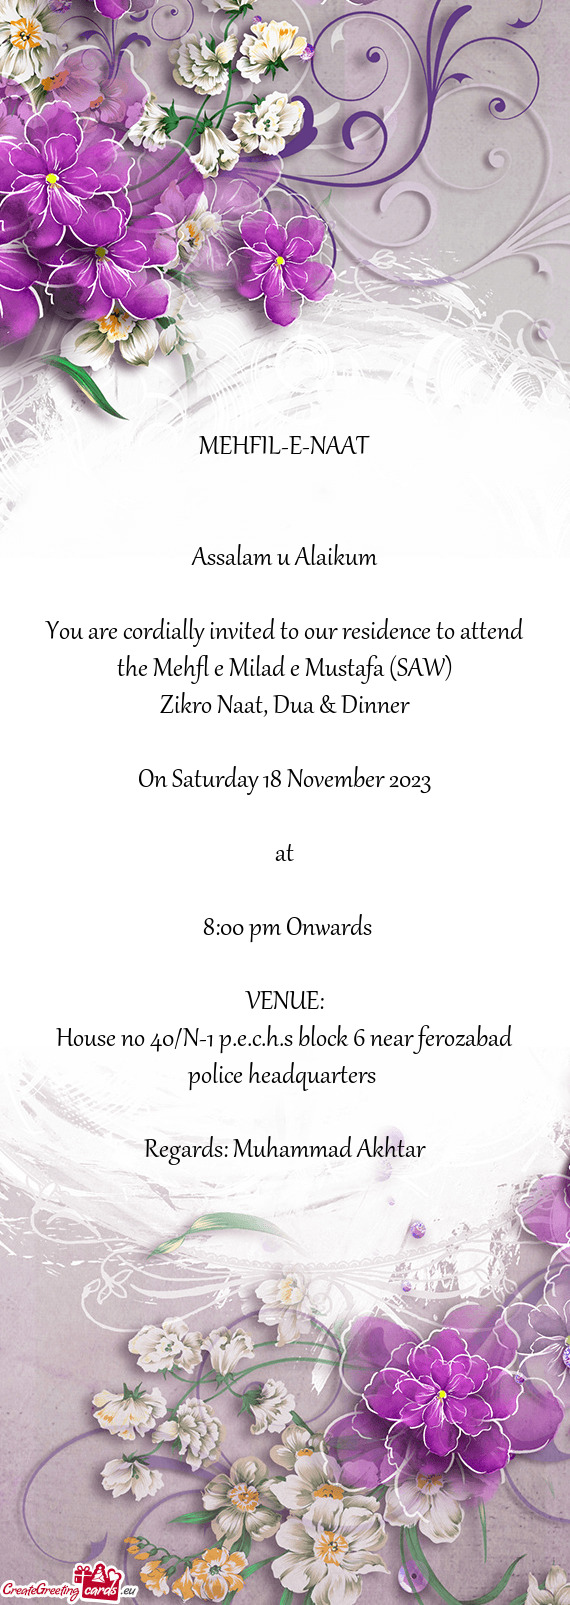 You are cordially invited to our residence to attend the Mehfl e Milad e Mustafa (SAW)